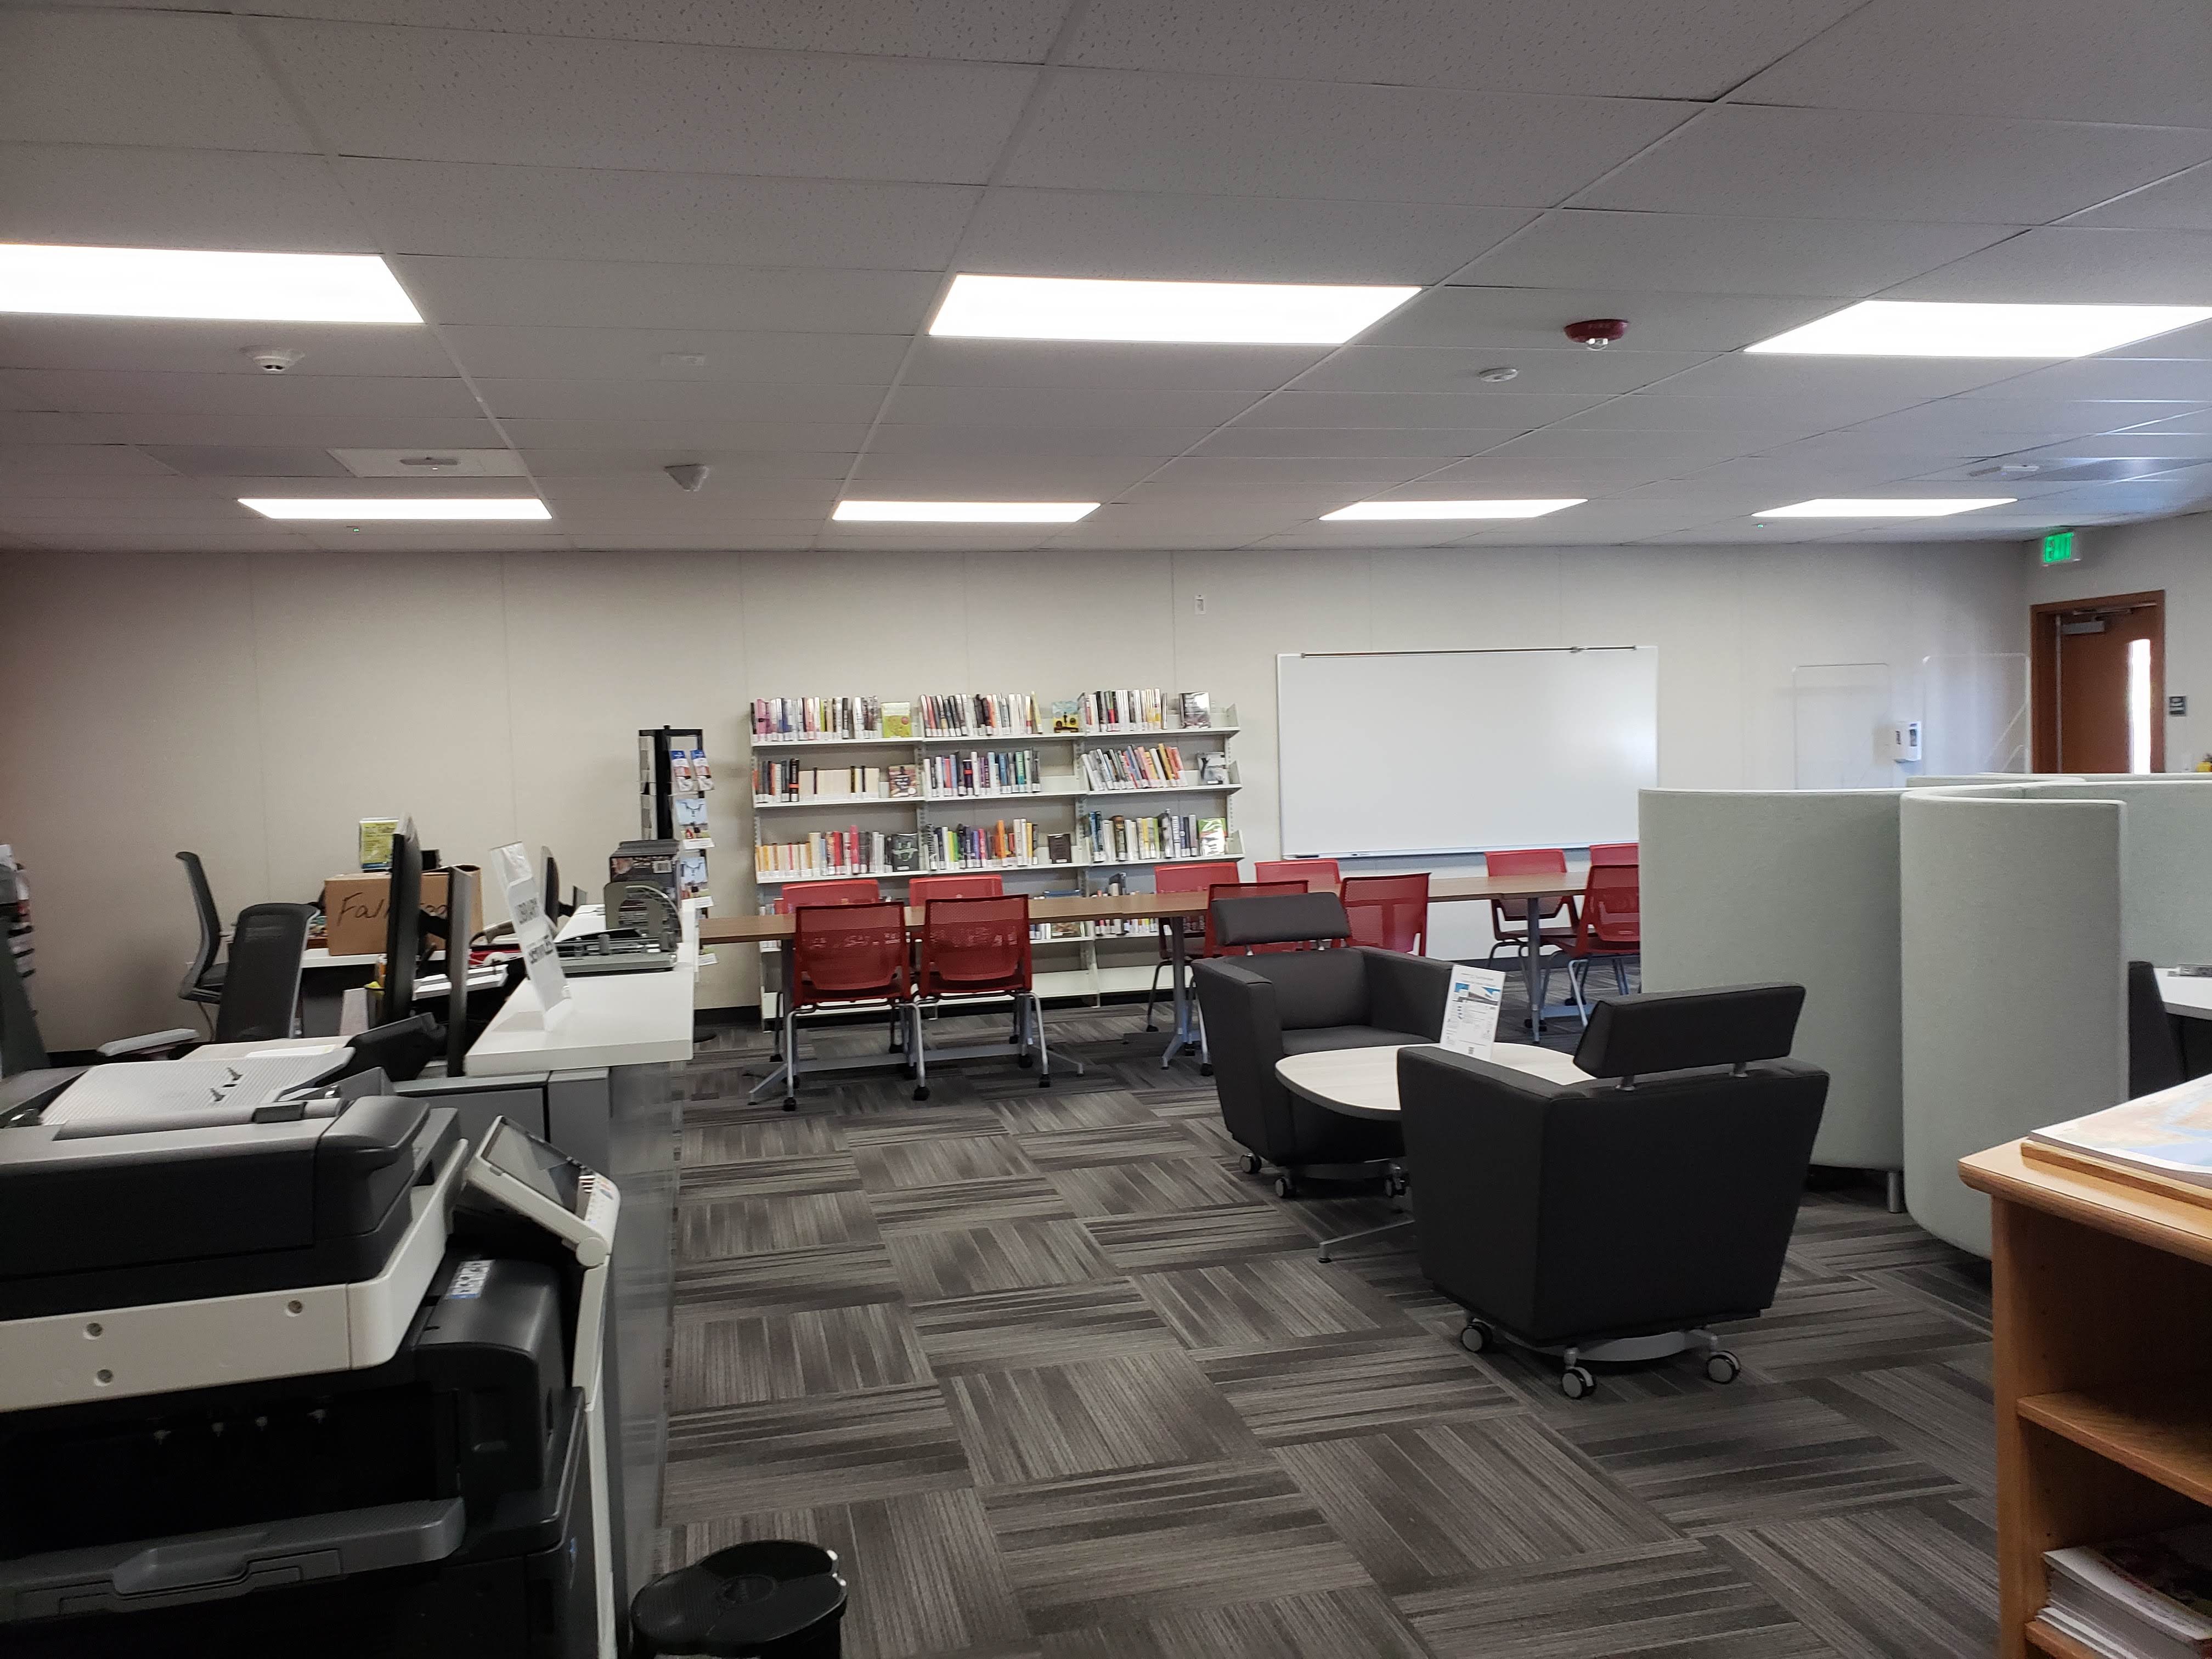 This is a photo of the Library/Teaching and Learning Center with book stacks and comfortable seating.